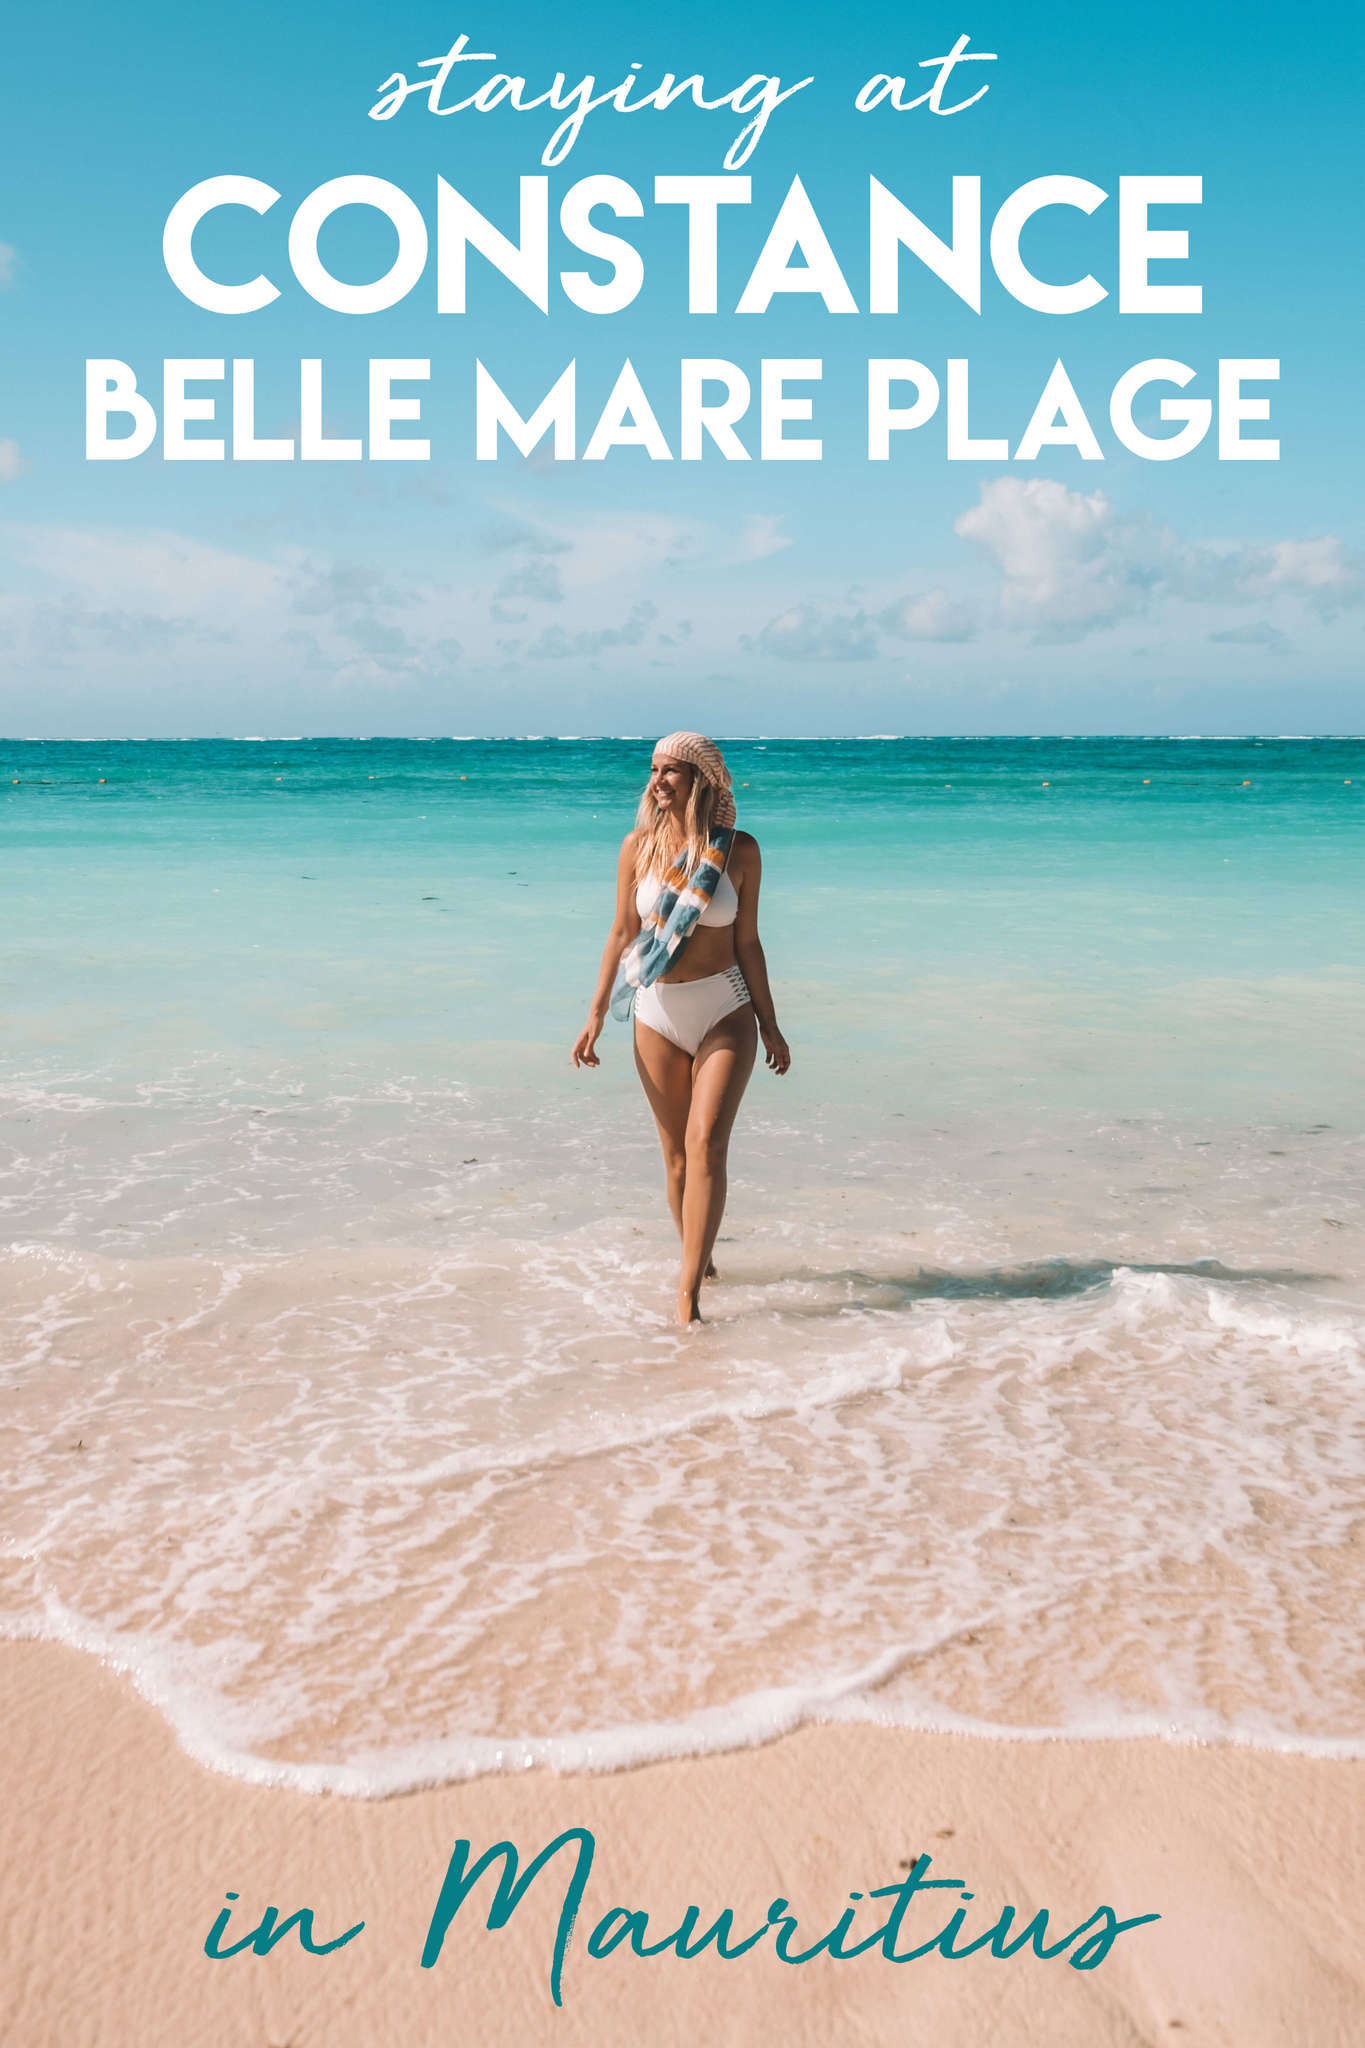 Staying at the Constance Belle Mare Plage